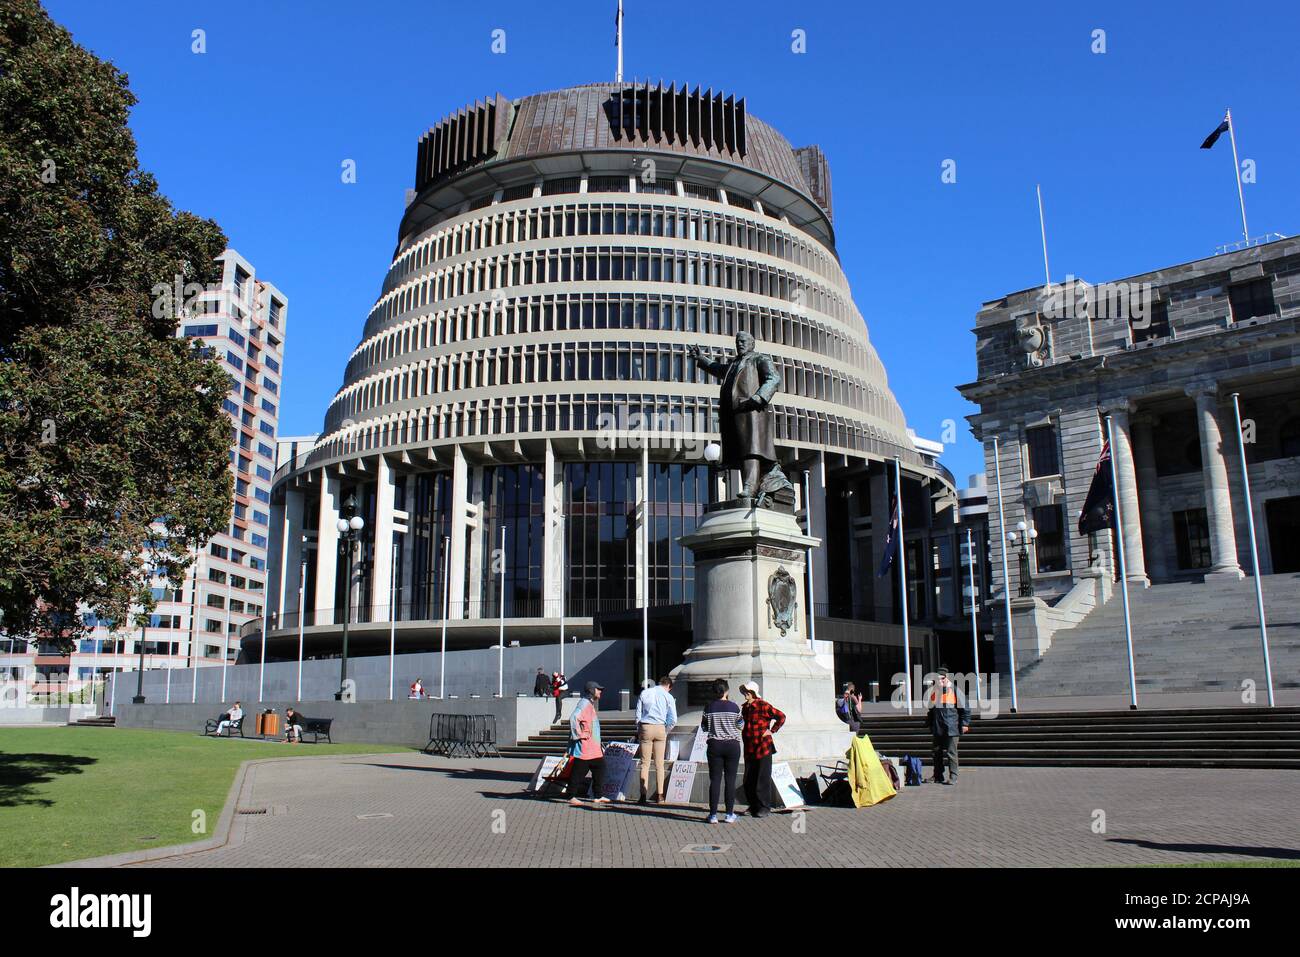 A view shows the Executive Wing of the New Zealand Parliament complex, popularly known as 'Beehive' because of the building’s shape, in Wellington, New Zealand July 23, 2020. Picture taken July 23, 2020. REUTERS/Praveen Menon Stock Photo